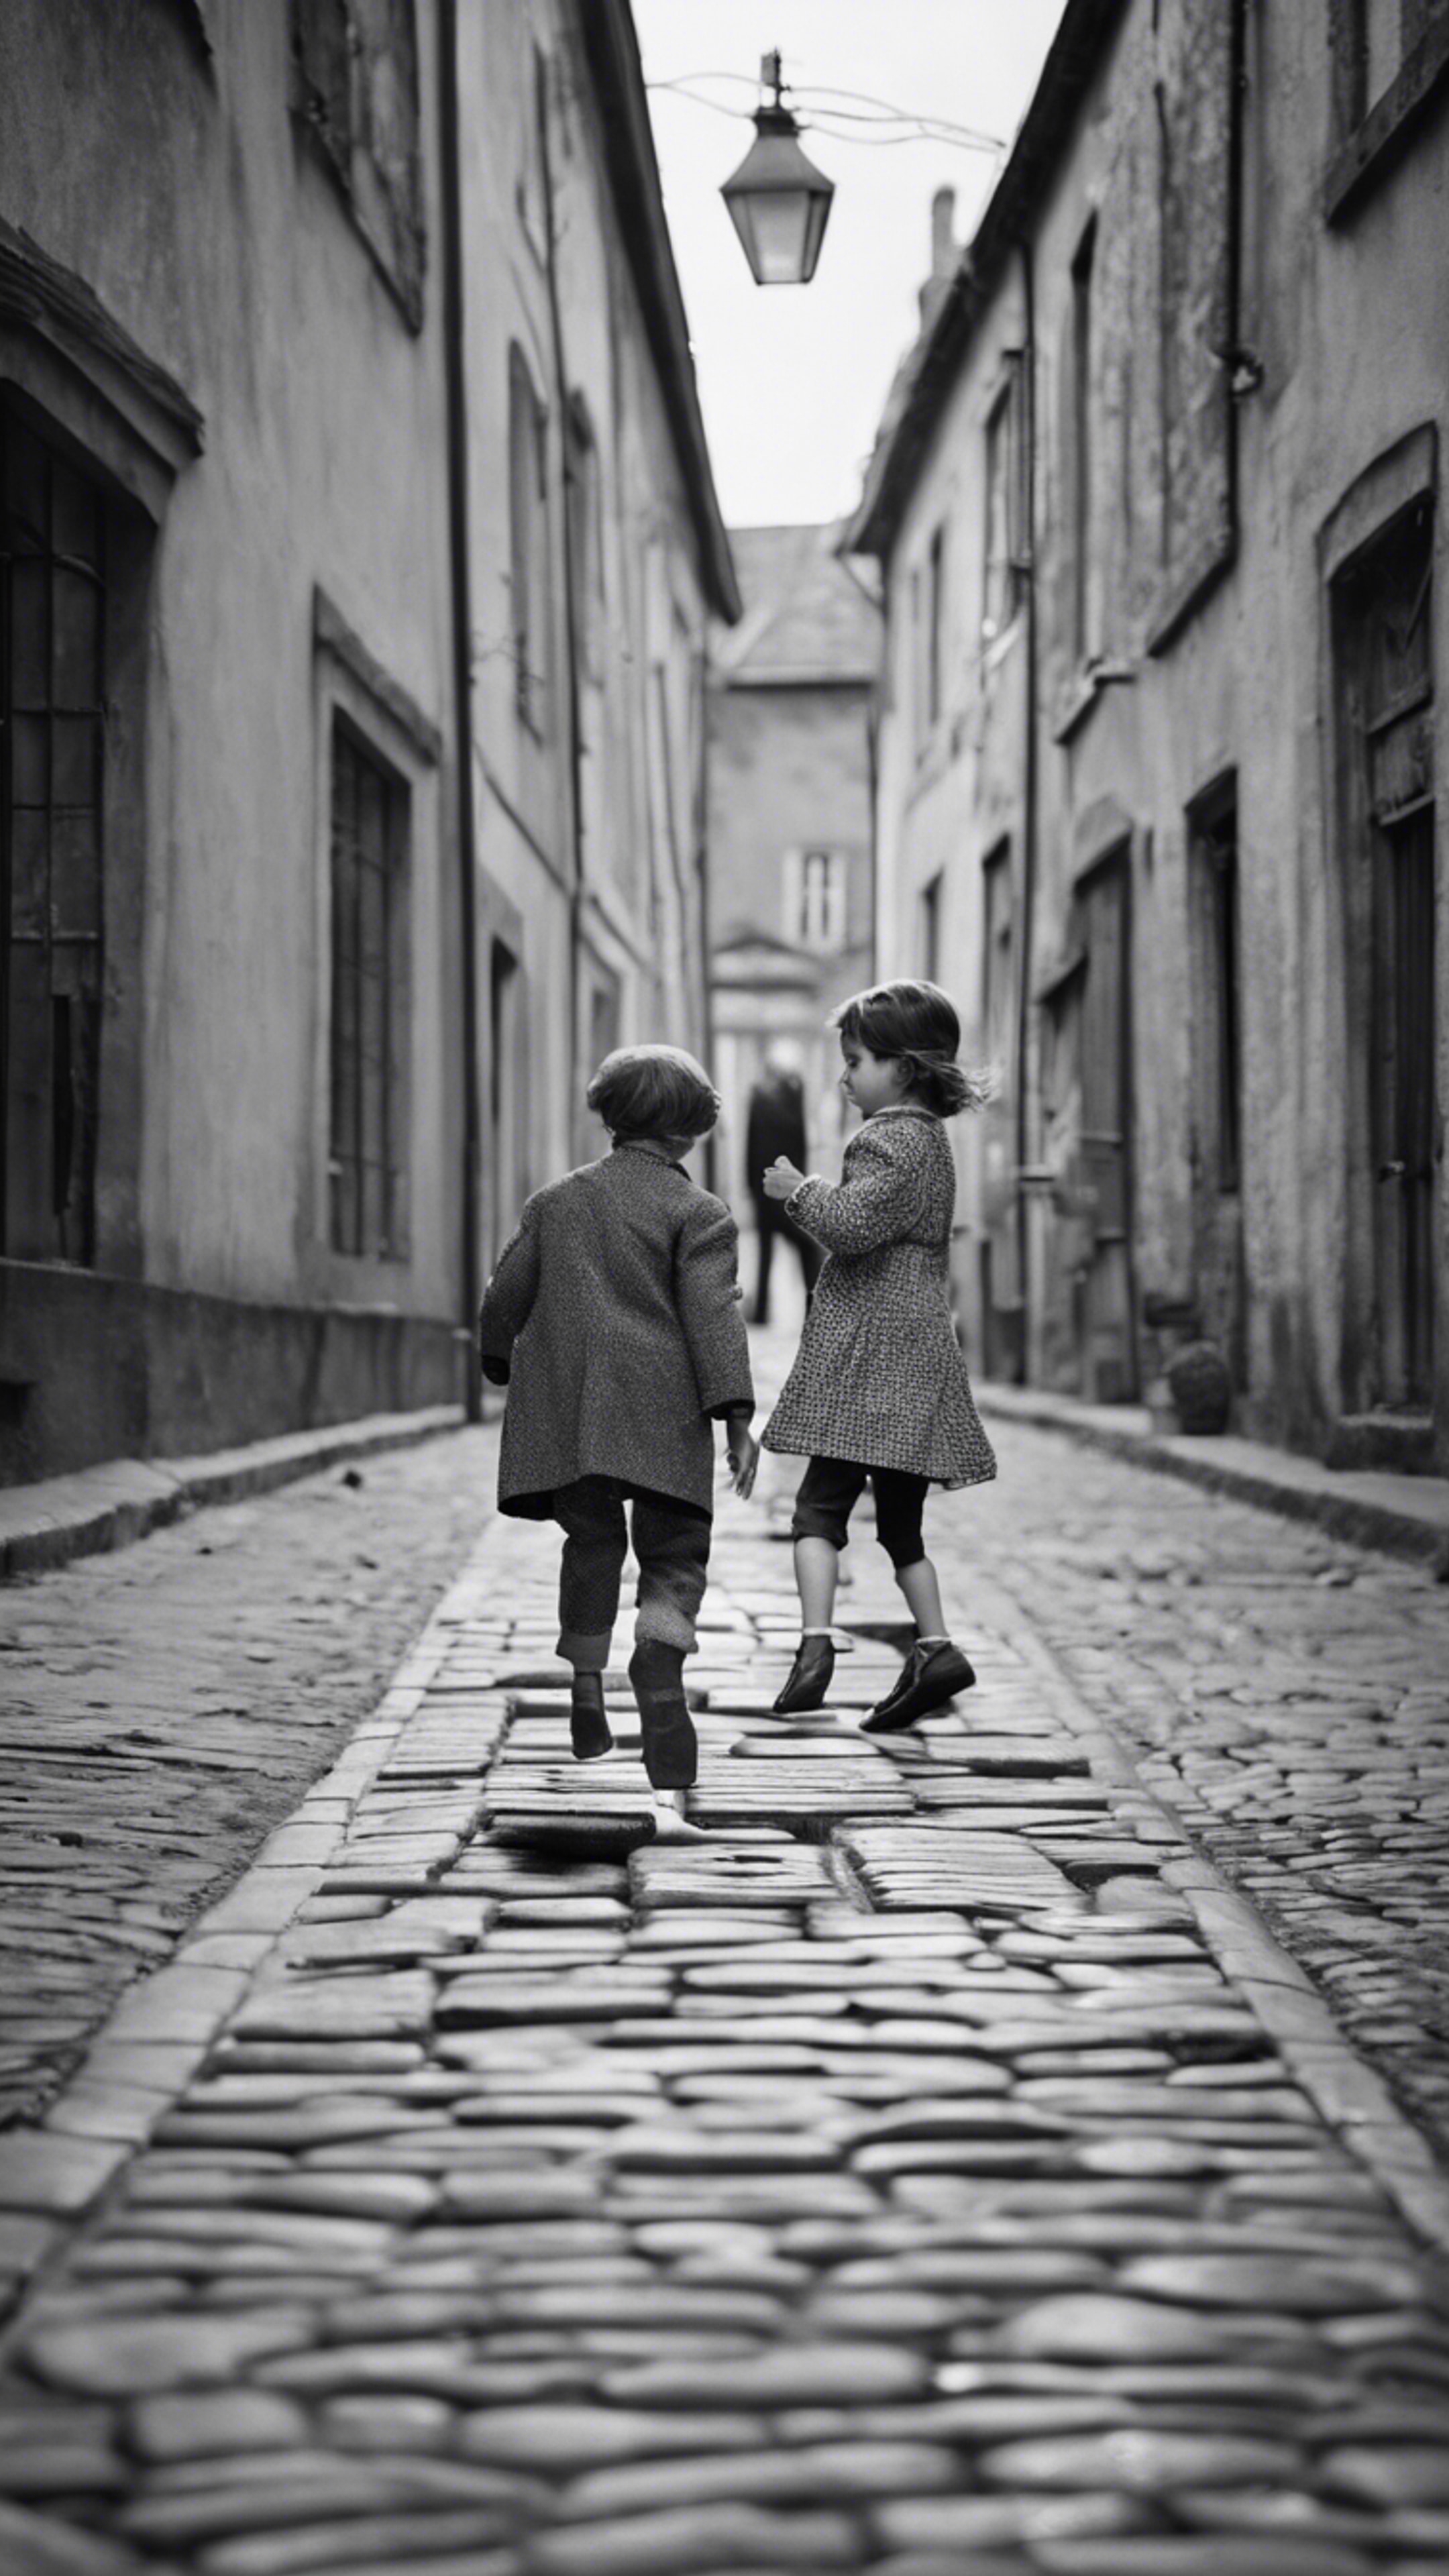 A black-and-white picture of children playing hopscotch on a cobbled street. The scene is bustling with vintage clothing and old buildings indicative of 1940s Europe. 牆紙[4df91ed9803e41c8b6d7]